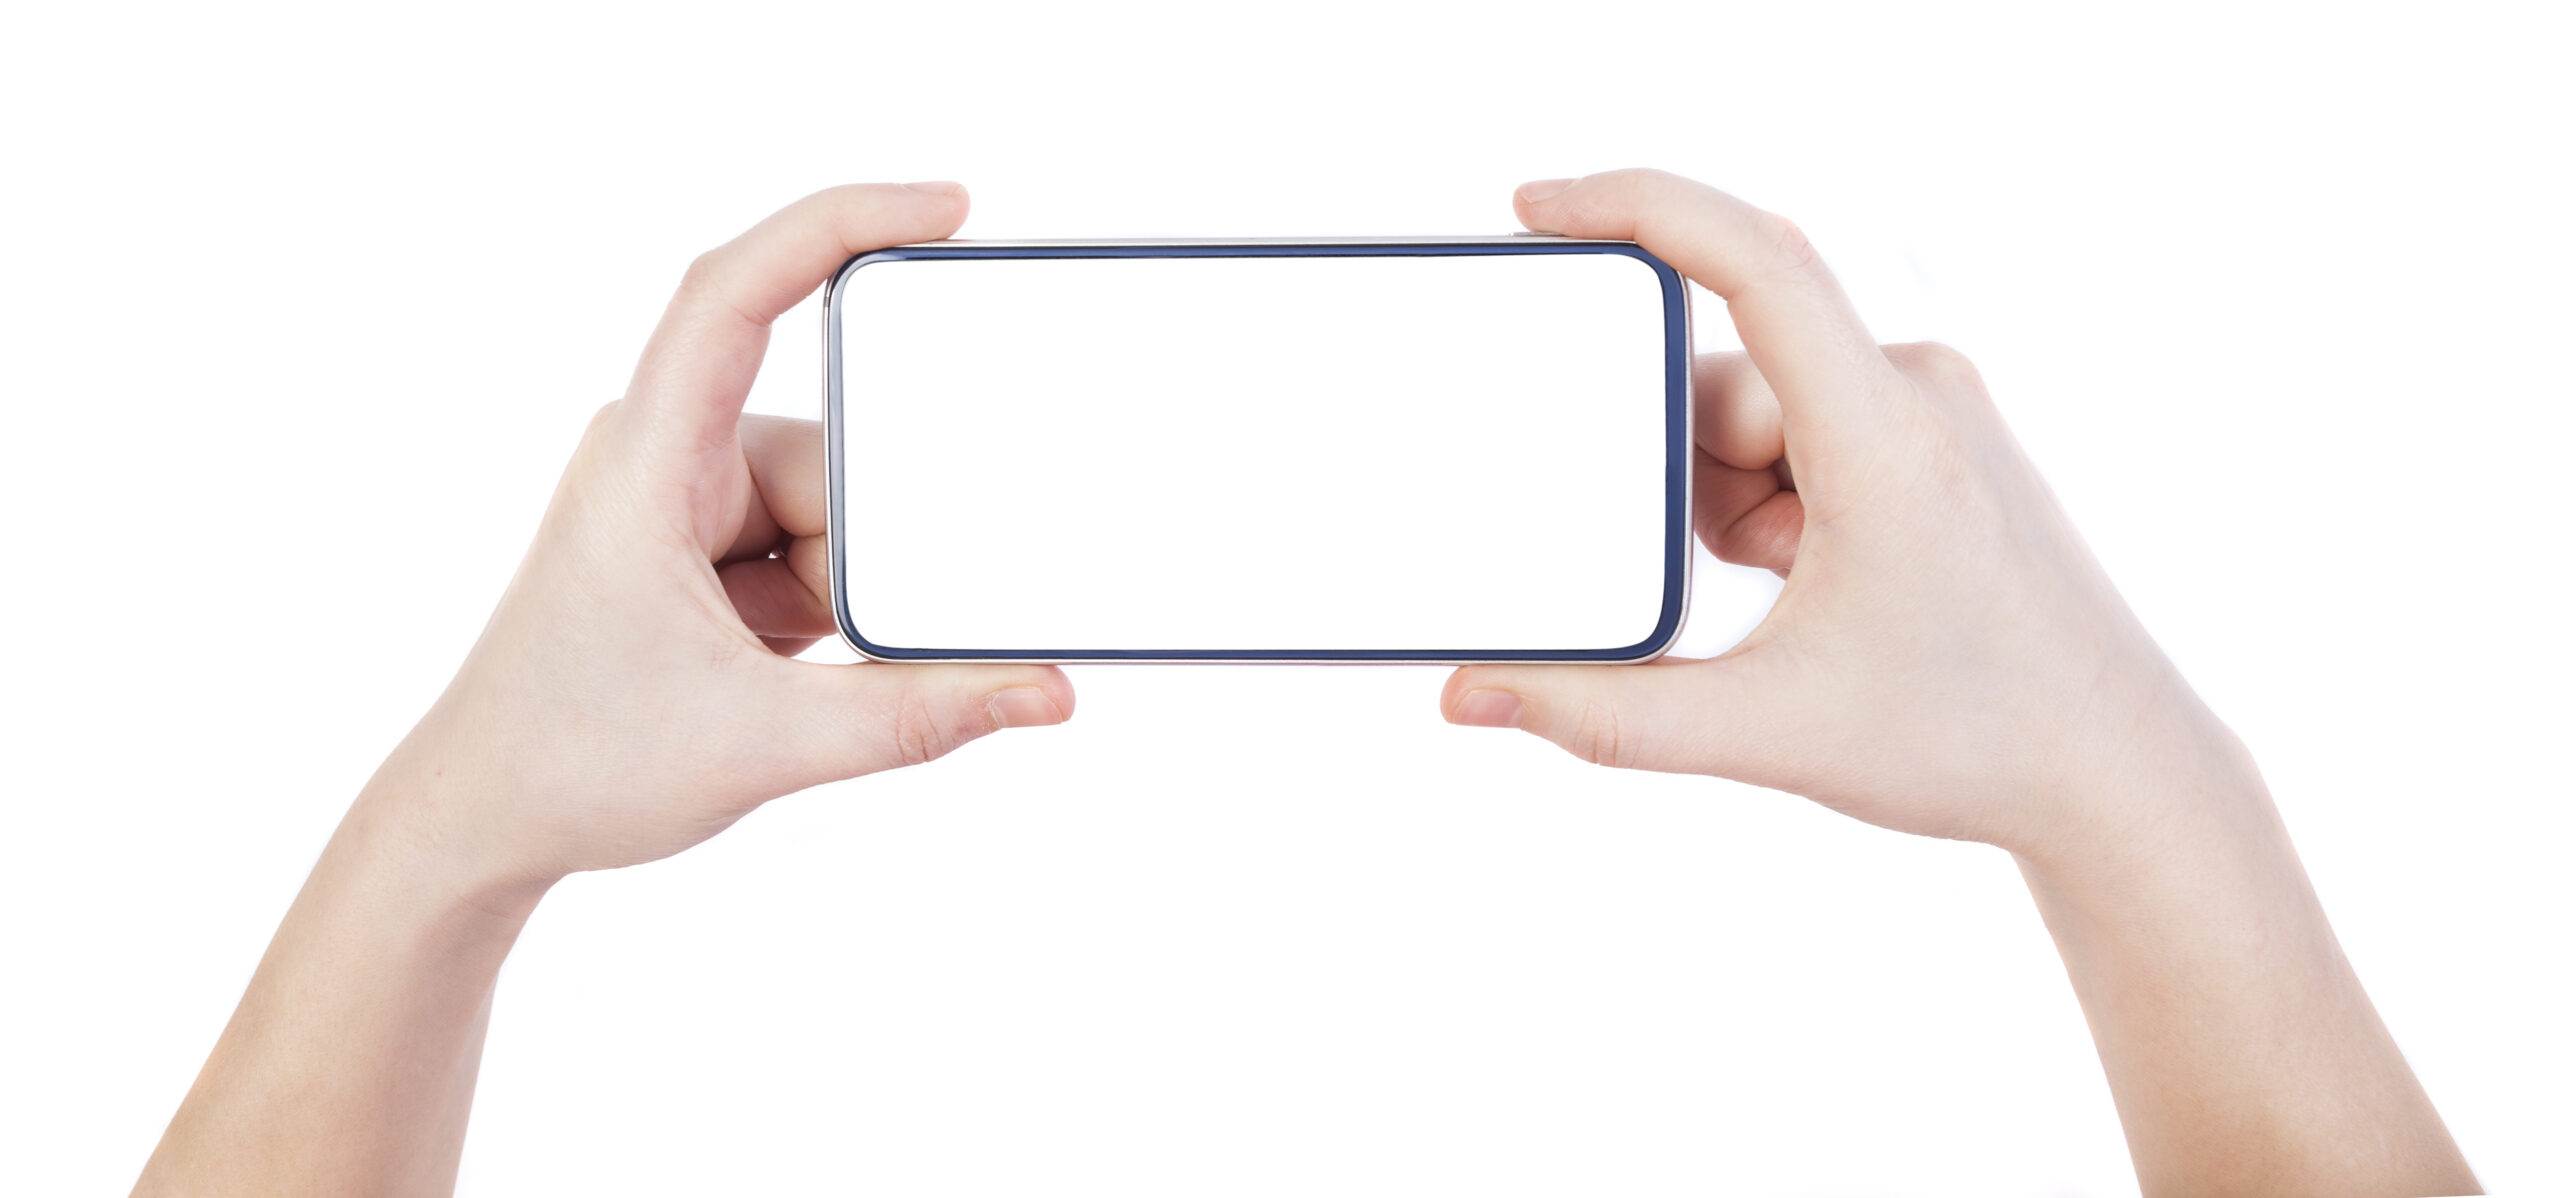 A smartphone in the hands with white screen